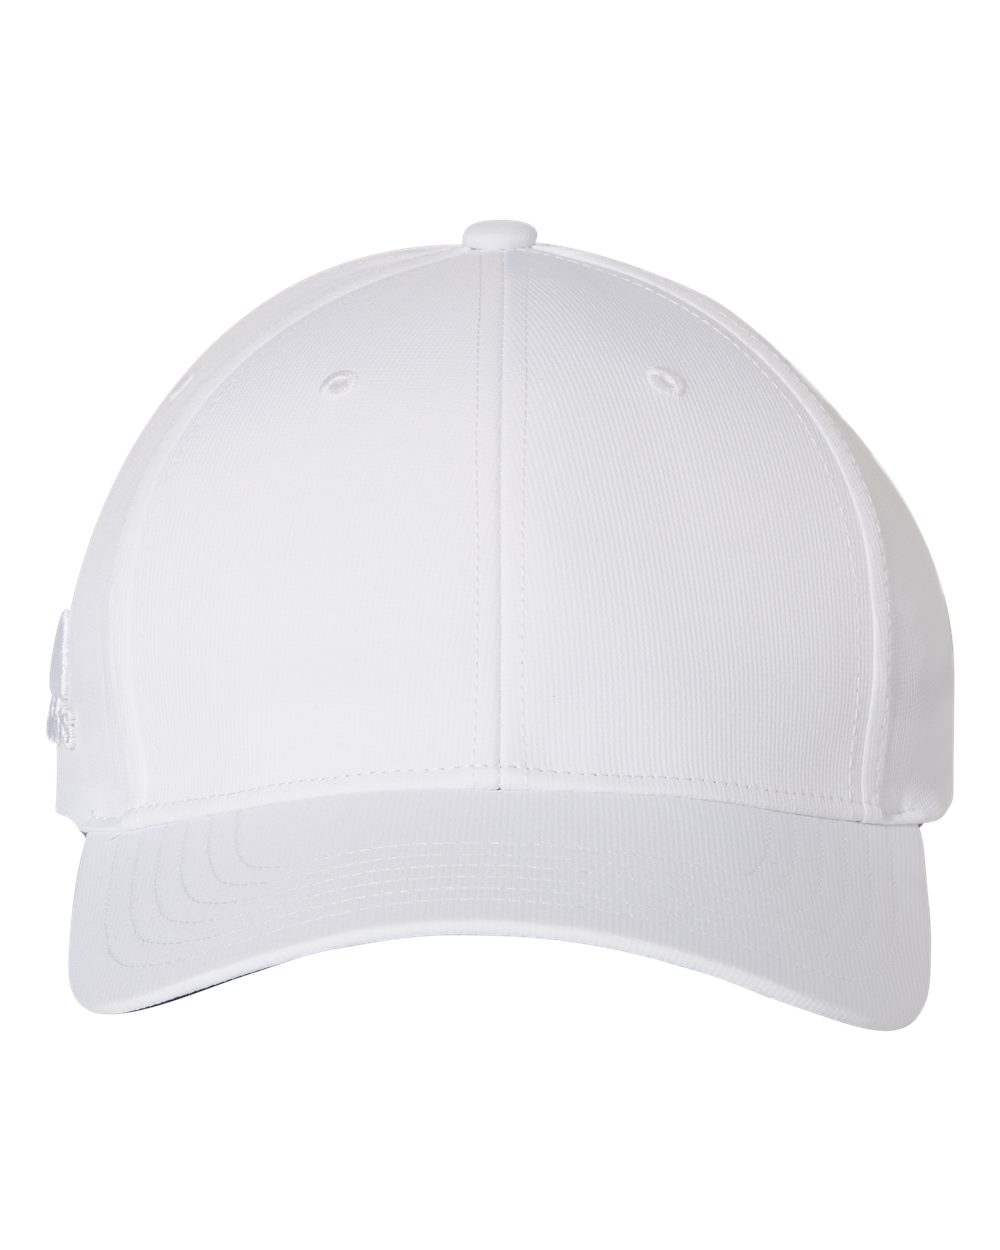 Poly Textured Performance Cap - A600P-